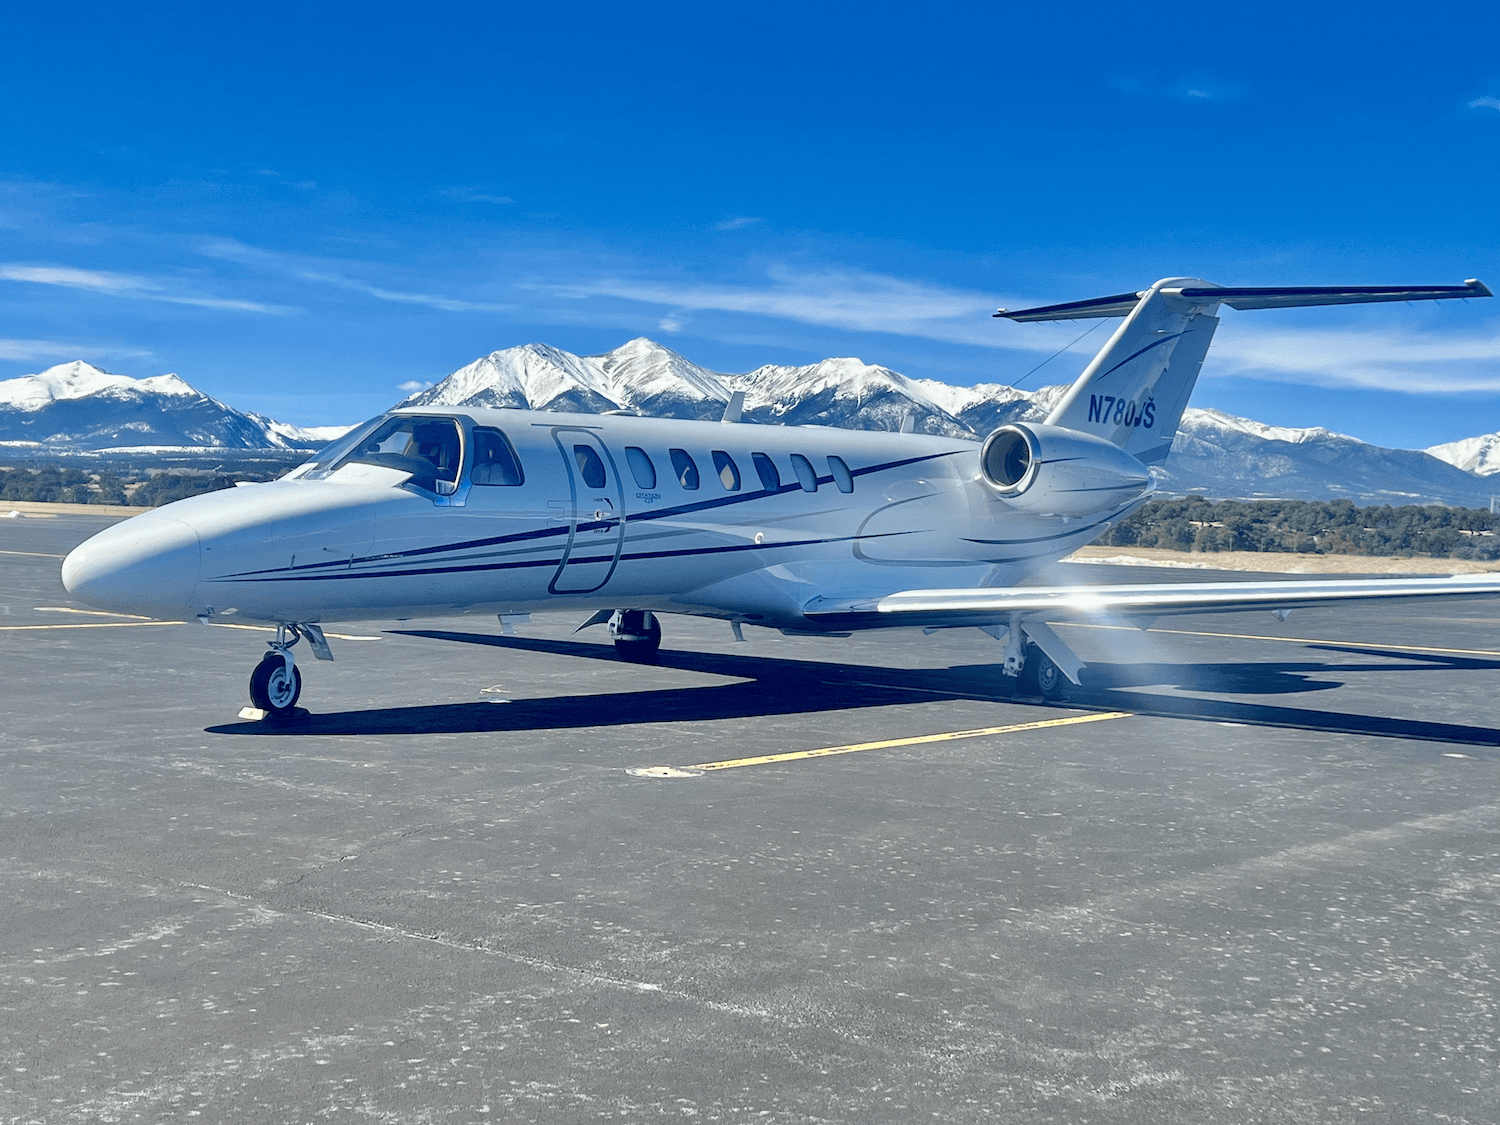 Product Newsroom | flyExclusive, One of the Fastest-Growing Providers of Premium Private Jet Charter Experiences, to Become Publicly Traded via Business Combination Agreement with EG Acquisition Corp. | flyExclusive image